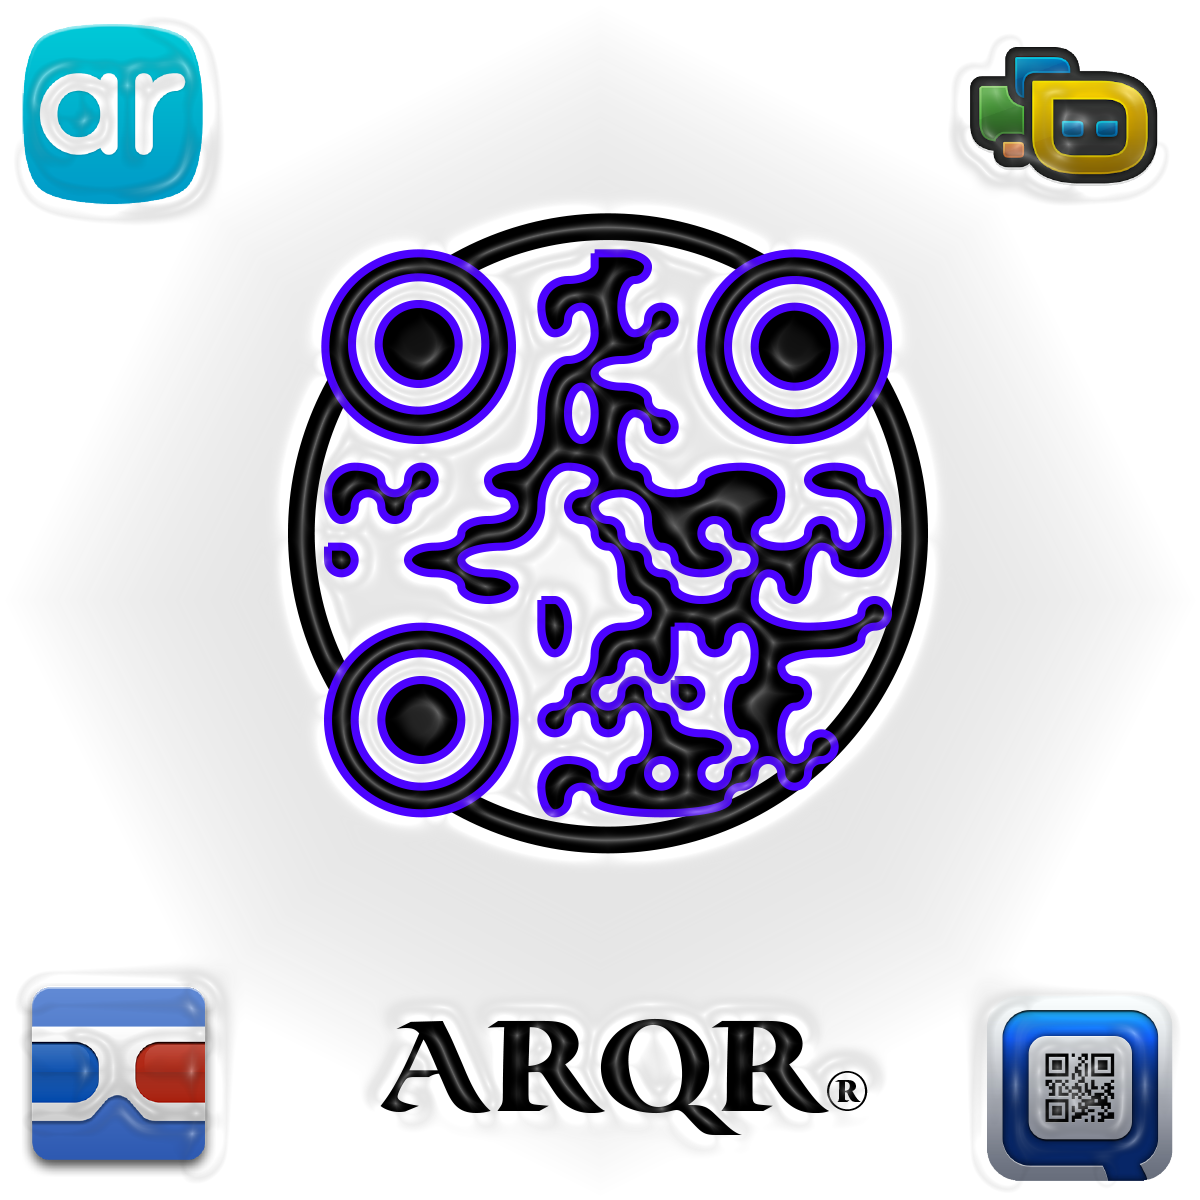 ARQR Code for apple.arqr.com by Laird Marynick